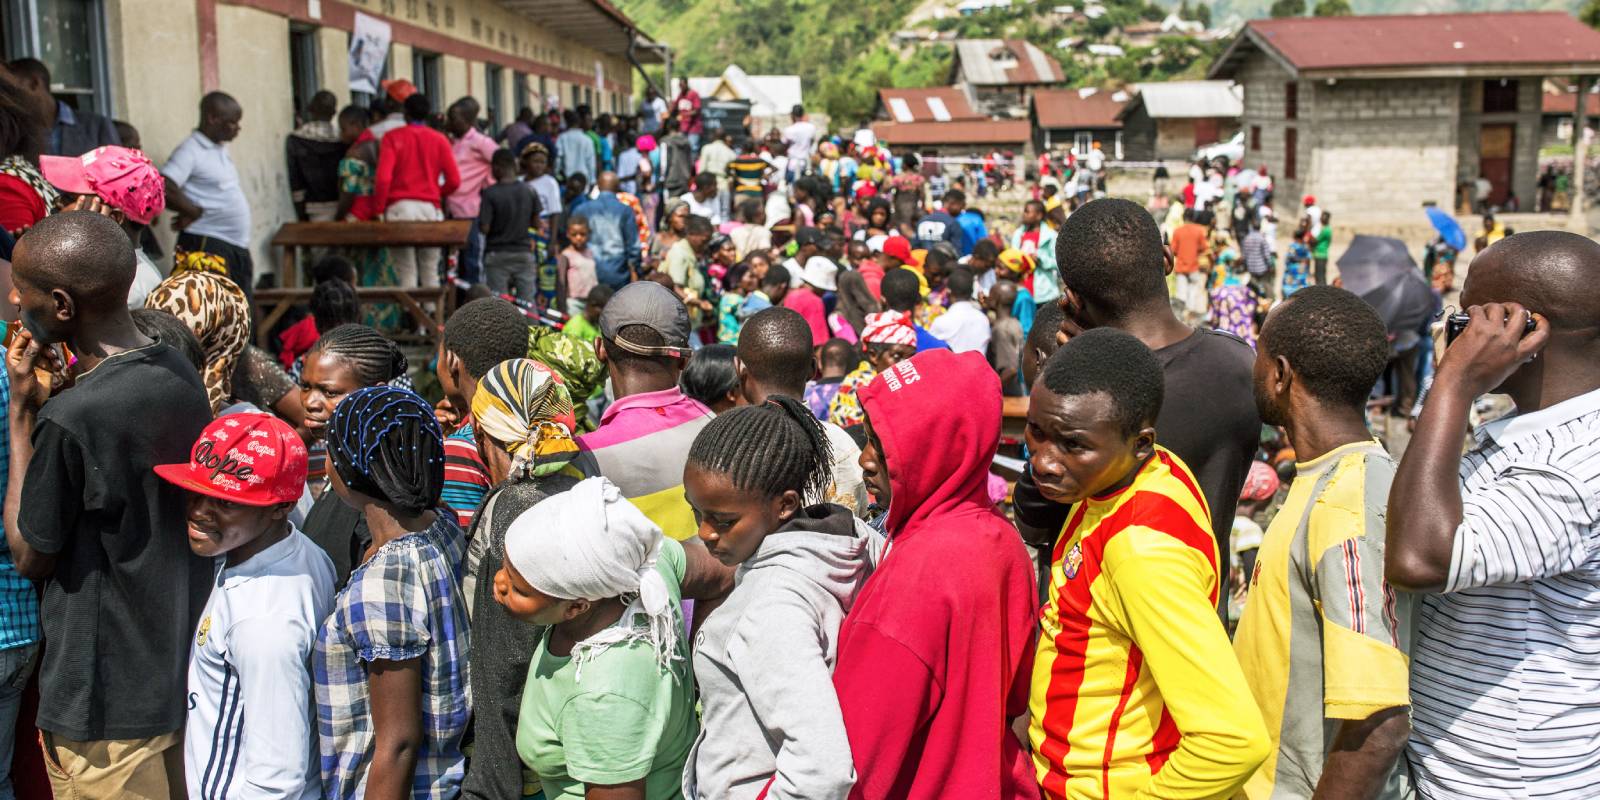 The Democratic Republic of the Congo’s Quest for Democracy Faces a New Test